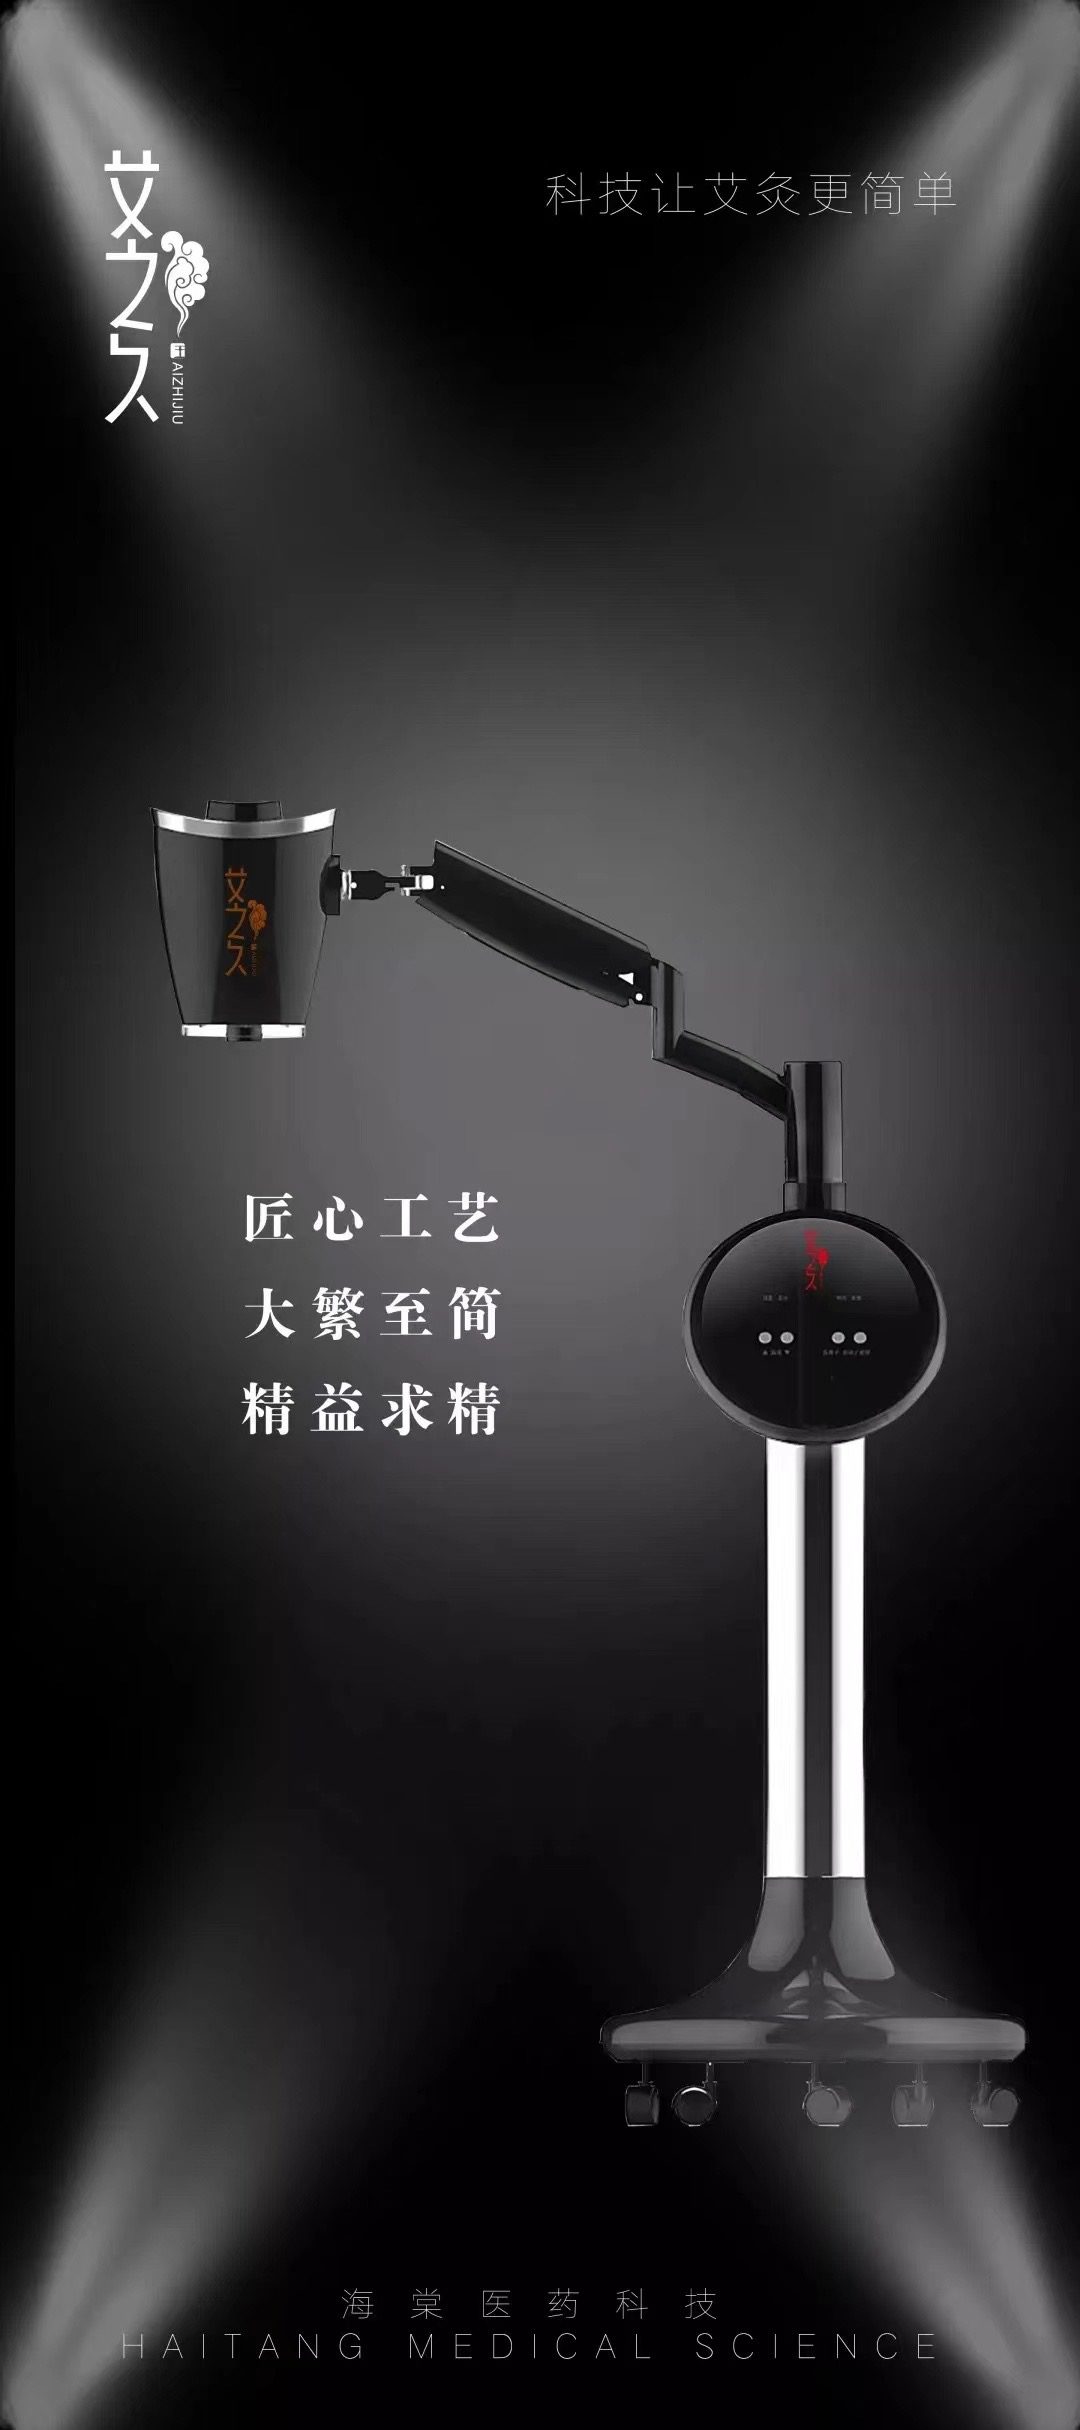 Product image of a black lamp on a black background.